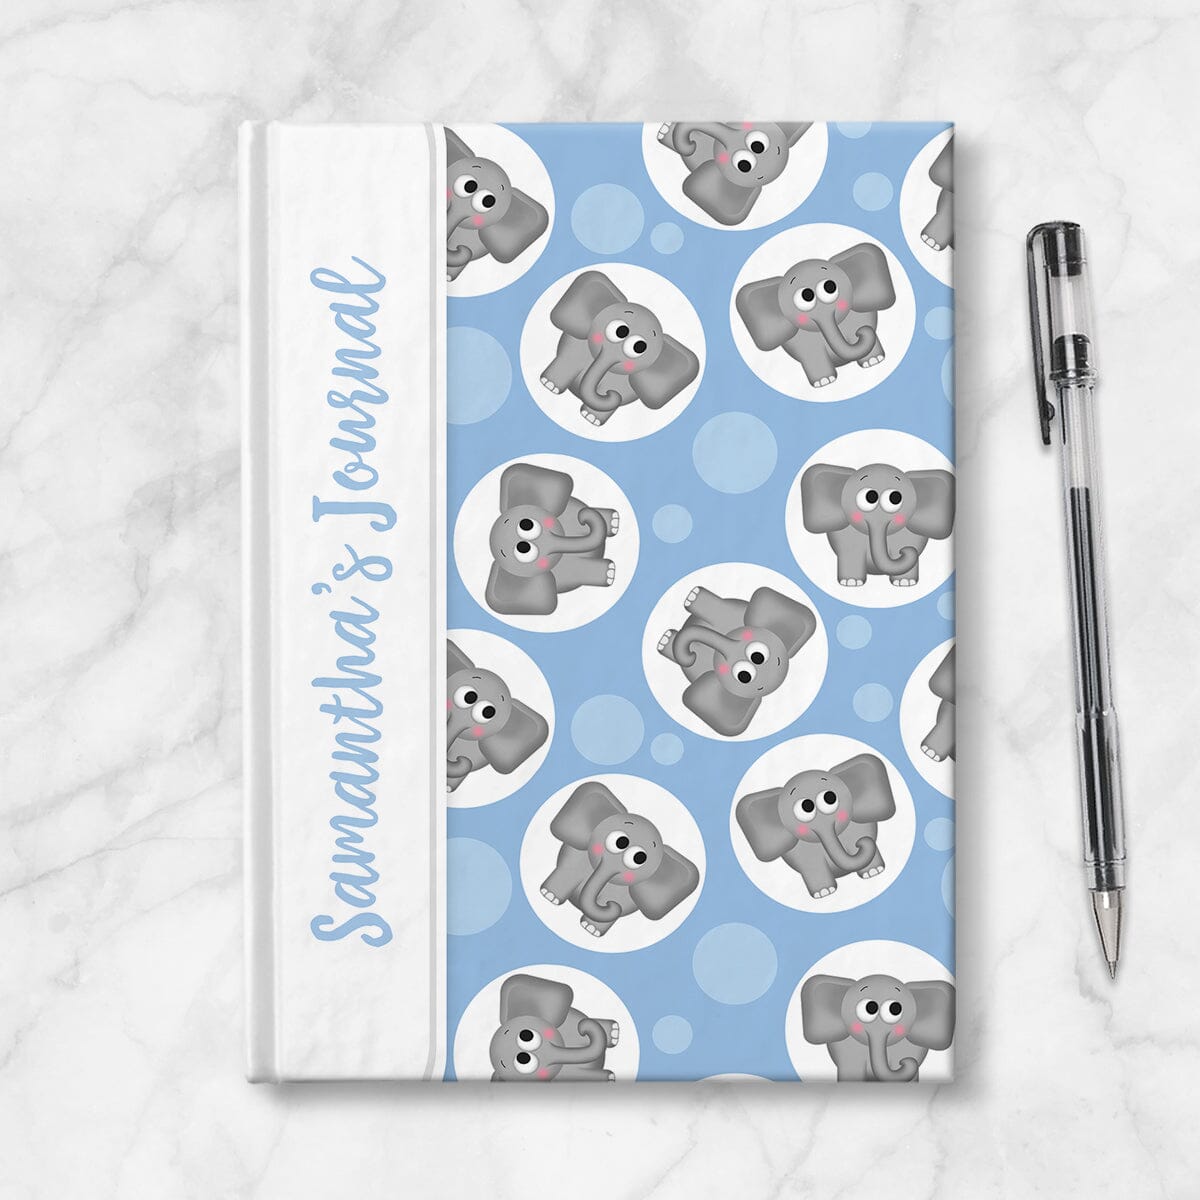 Personalized Notecards - elephant (blue and grey)